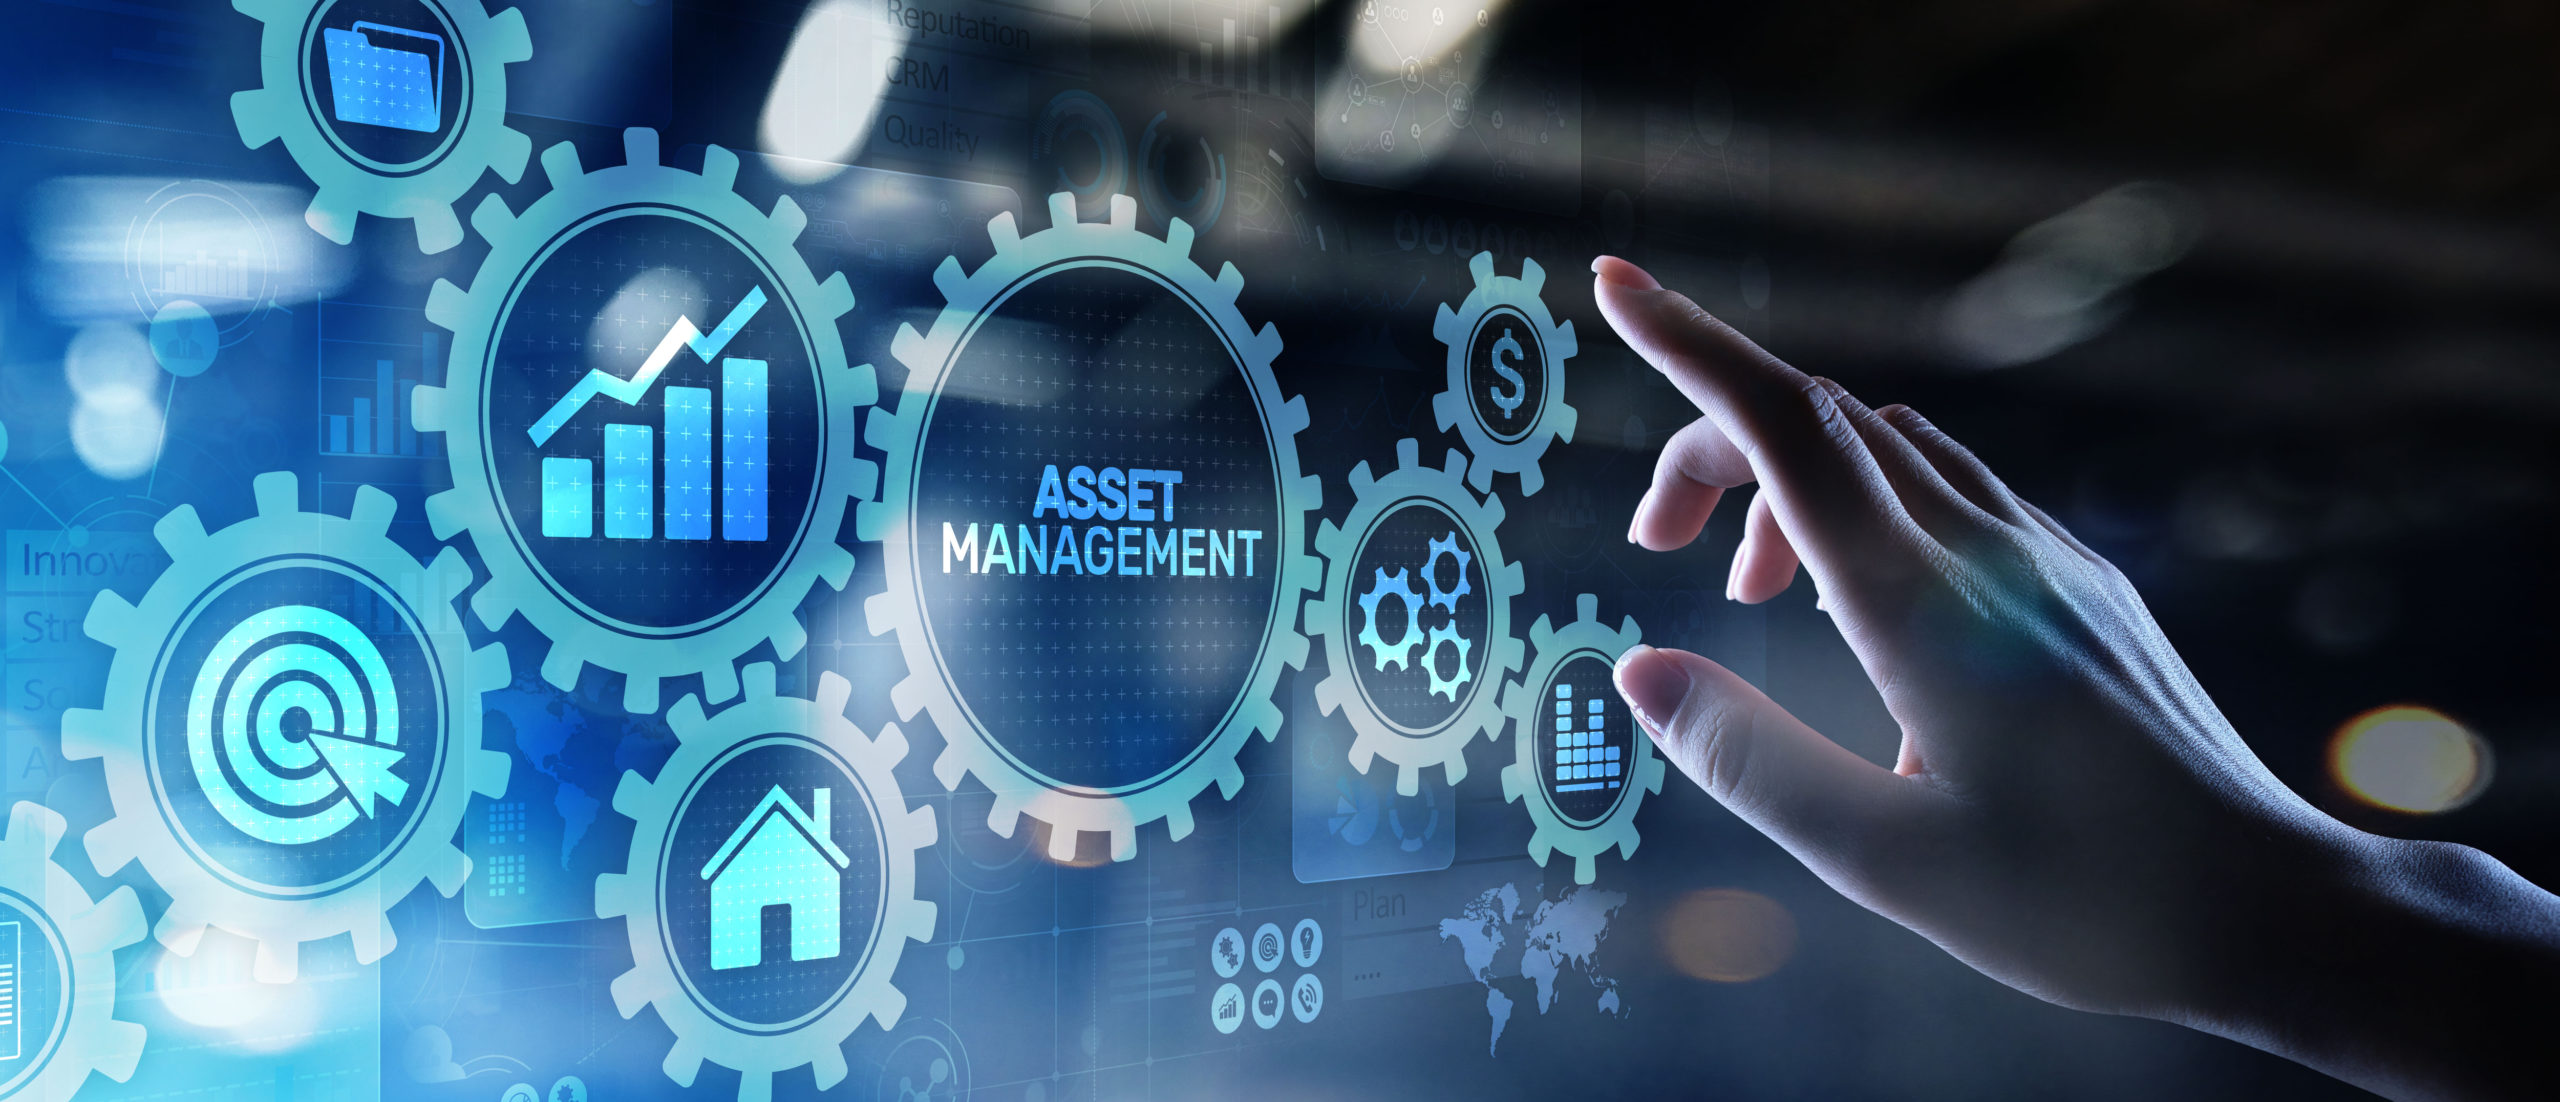 Asset Management St. Louis, MO | Financial Planners | Investment Advisors | Wealth Management